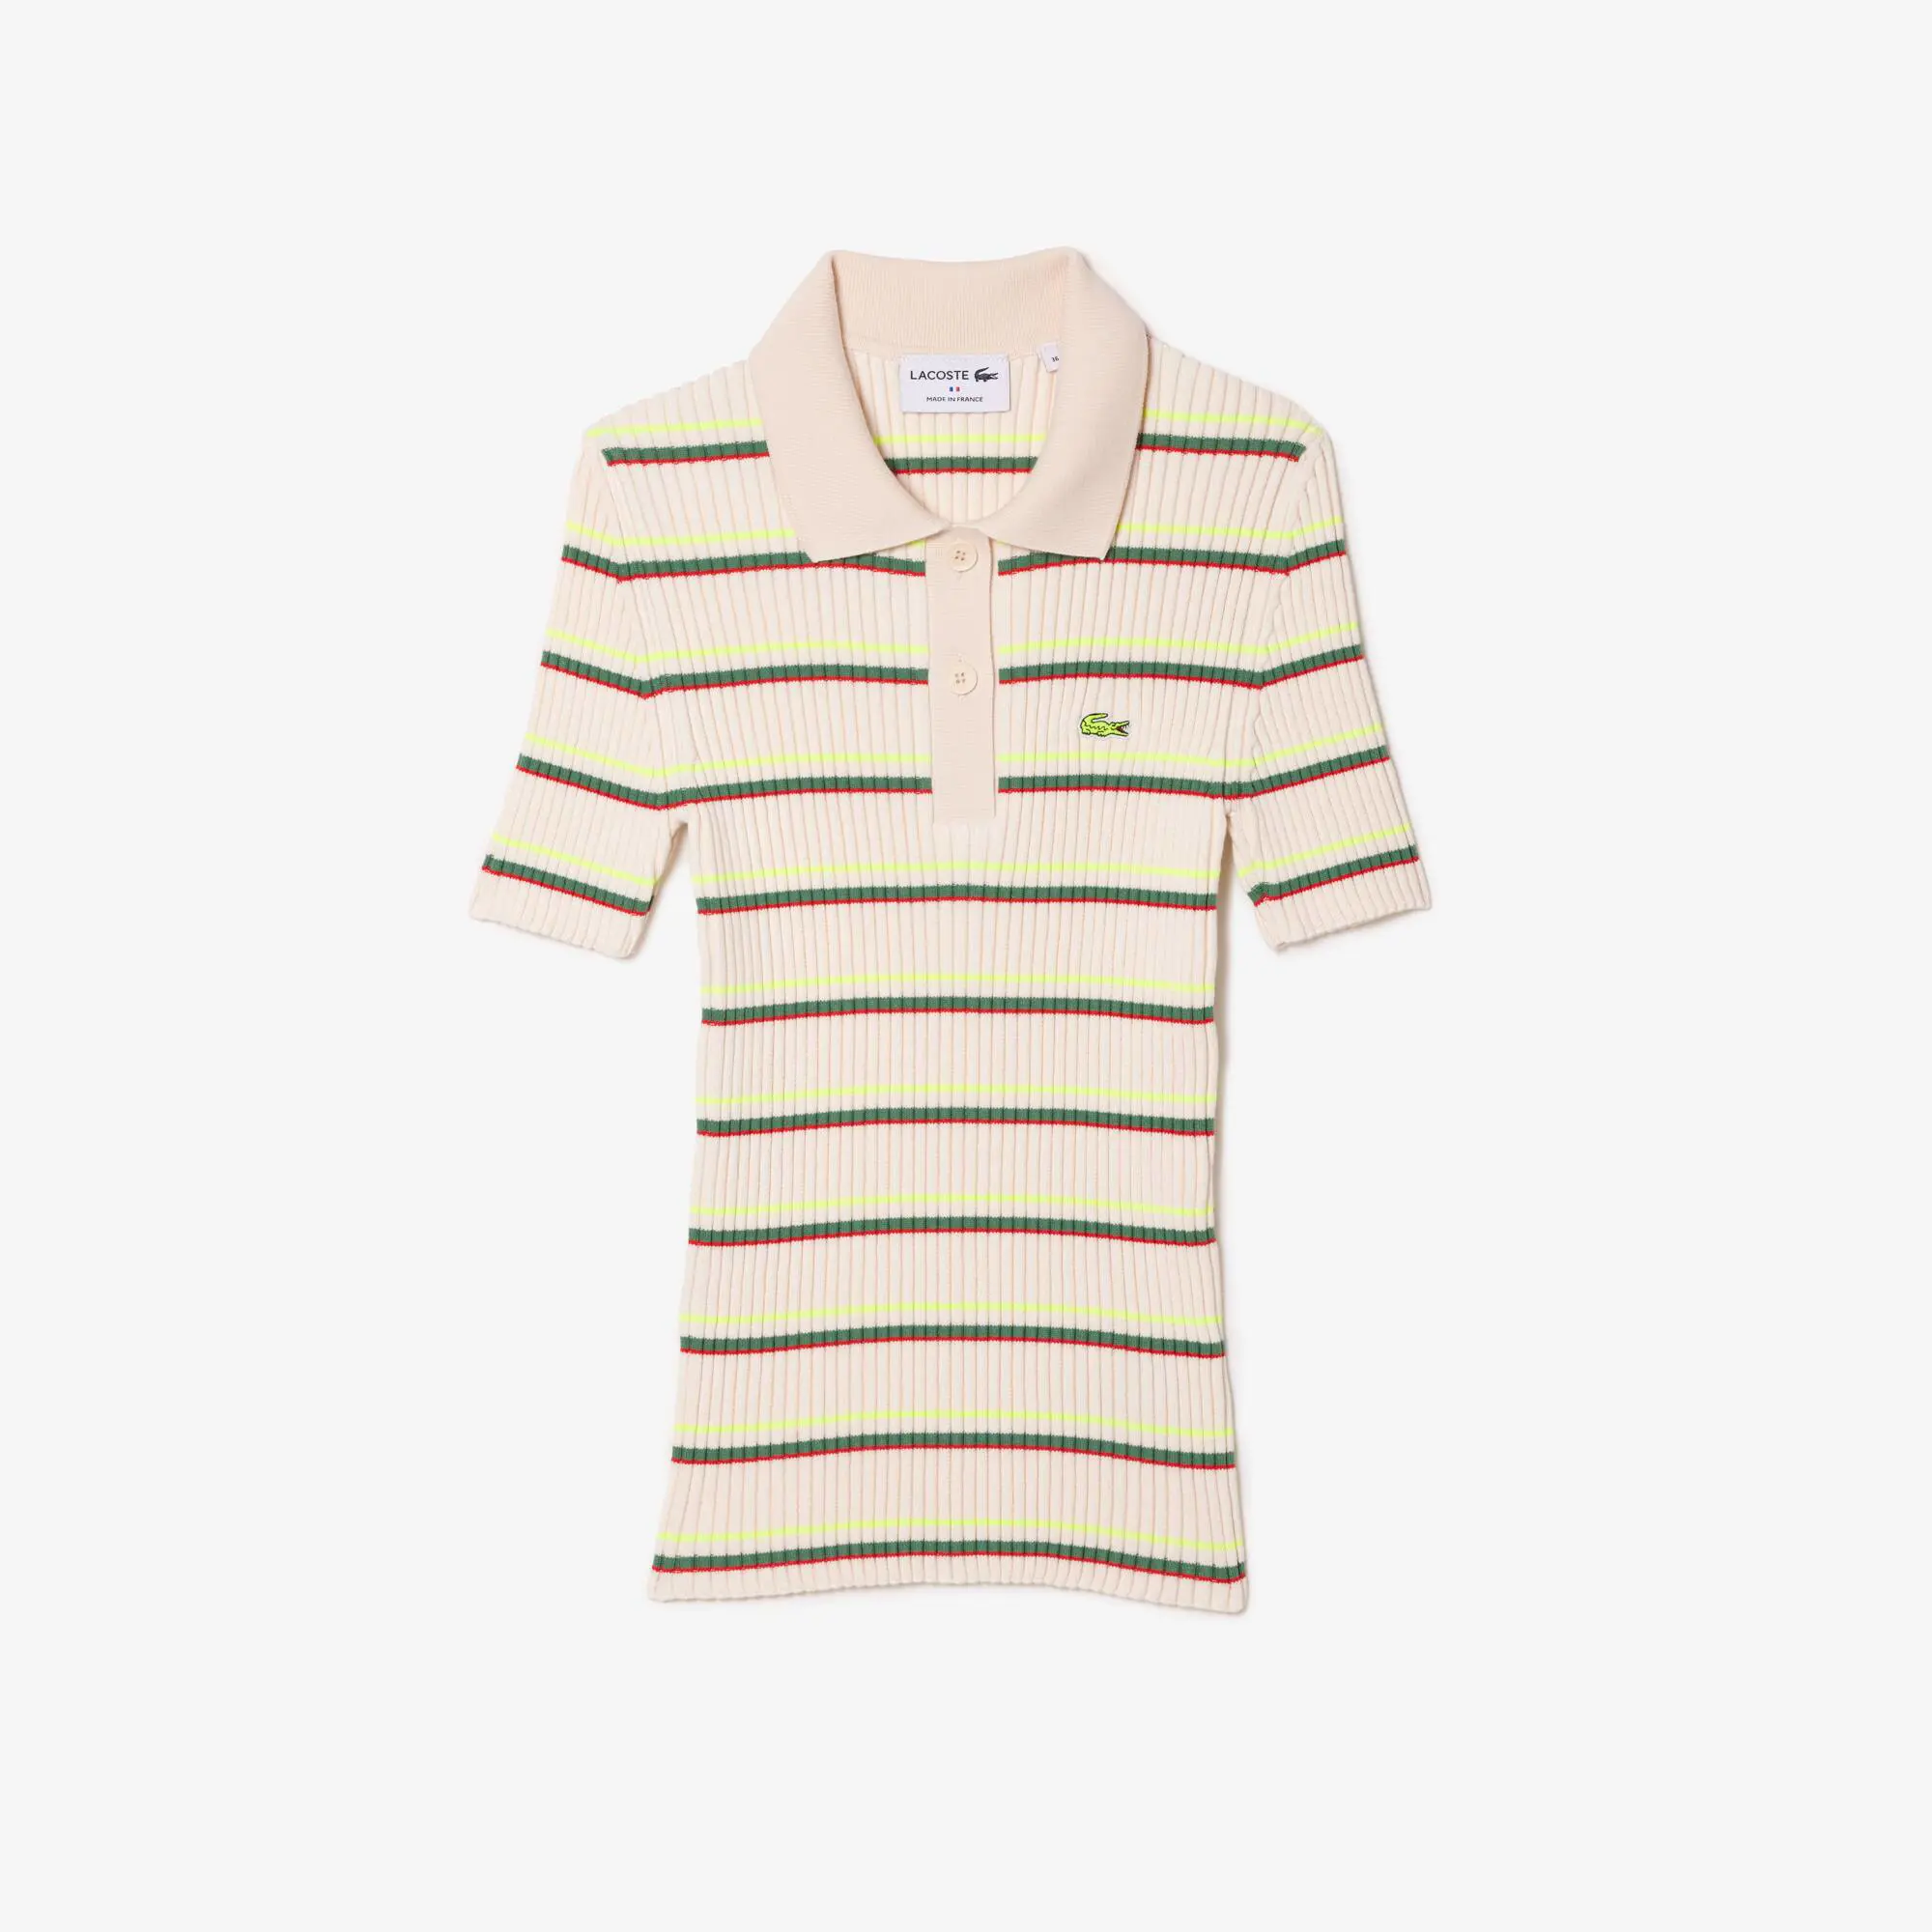 Lacoste Women’s Lacoste Organic Cotton French Made Striped Polo Shirt. 2